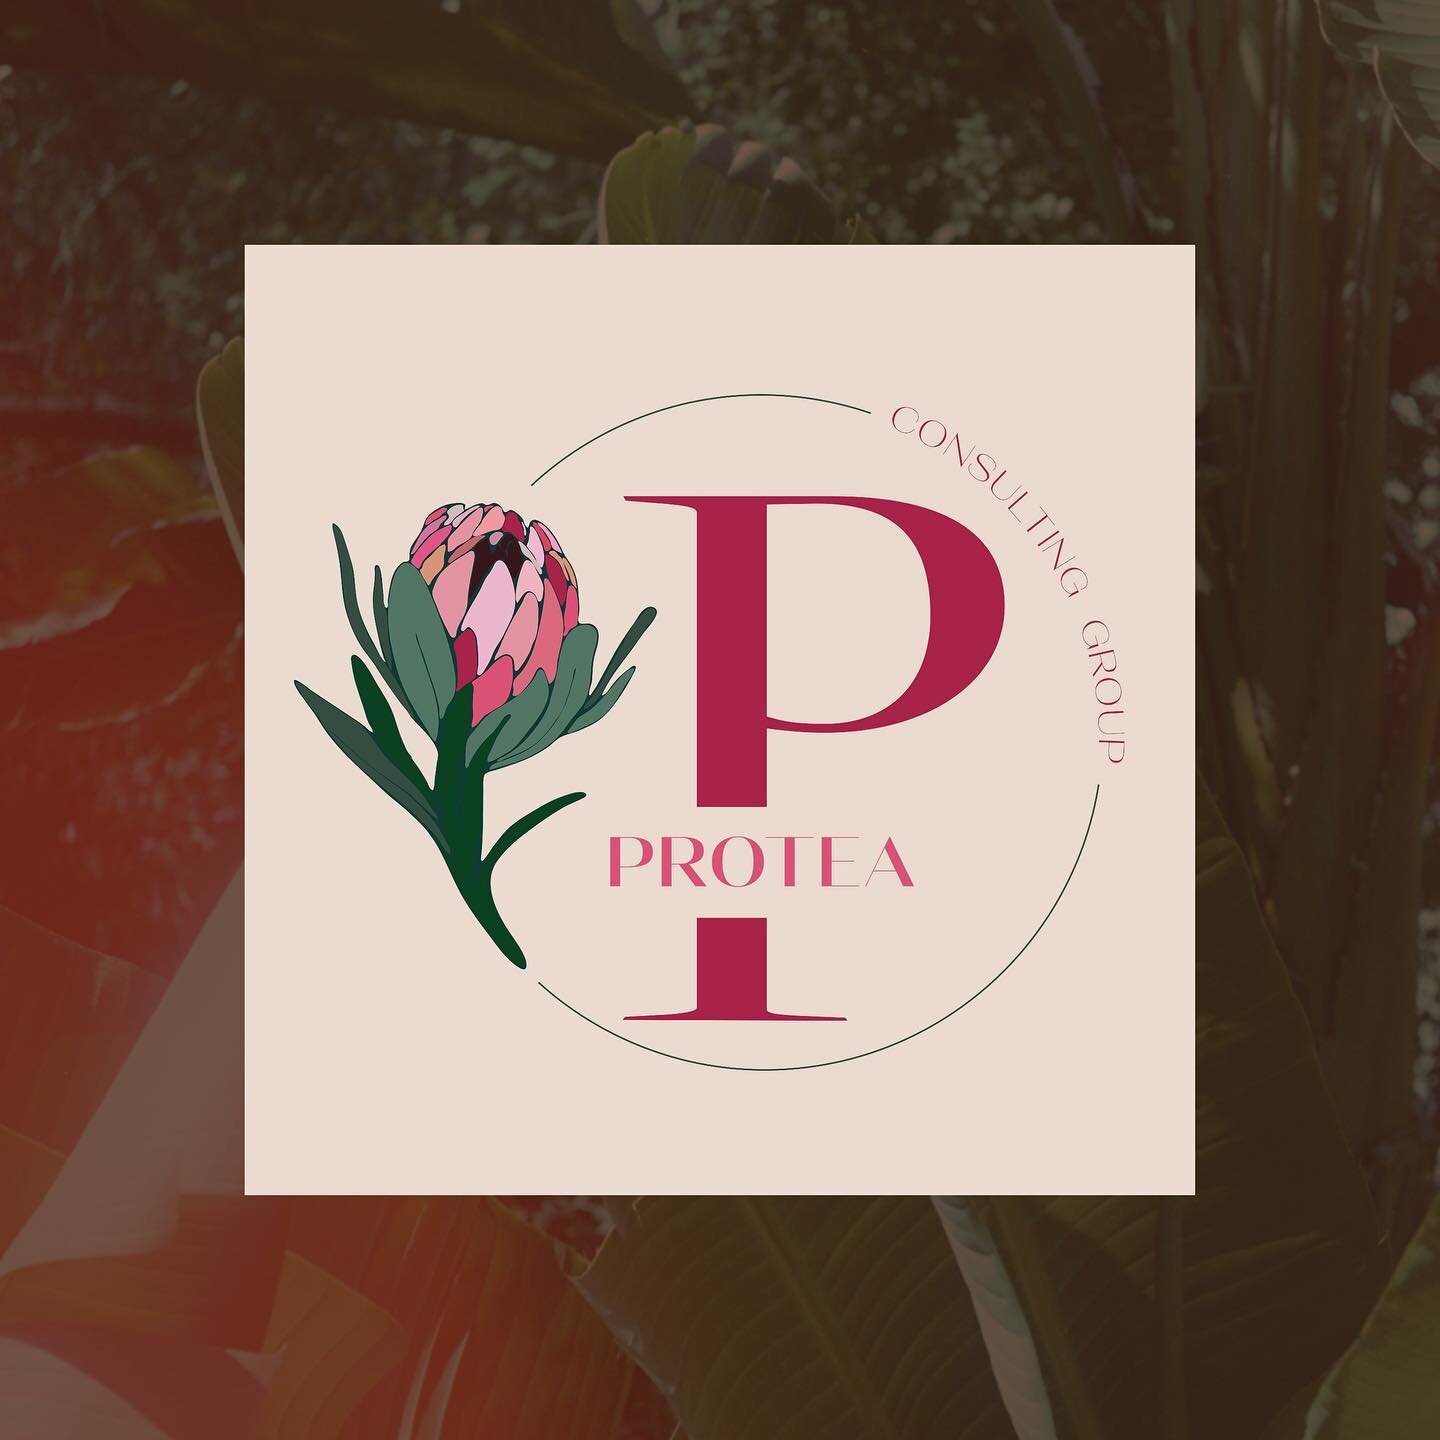 This branding project for Protea Consulting Group was such a joy! The client wanted a brand that embodied the principal values of her company - courage, diversity, transformation, and daring while also remaining wildly feminine. The protea flower is 